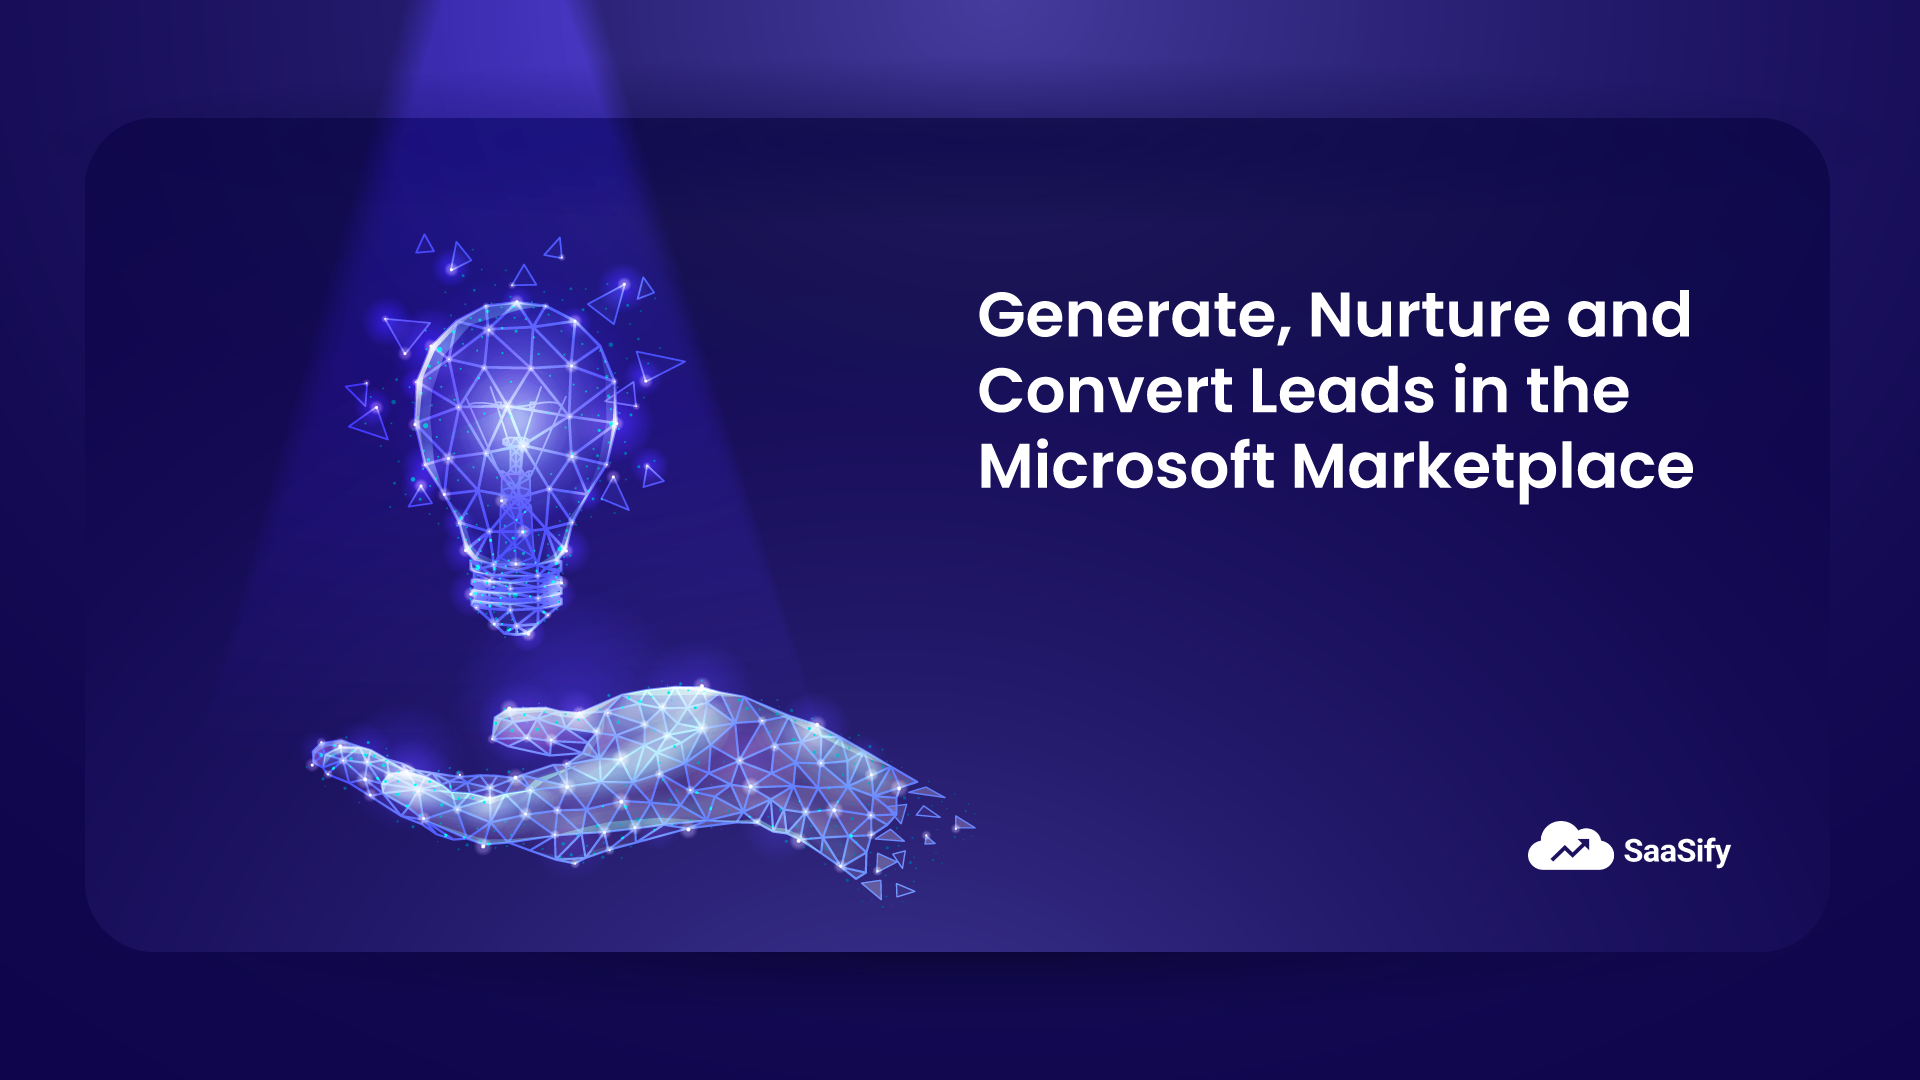 Microsoft Marketplace: Generate, Nurture and Convert Leads for Business Growth